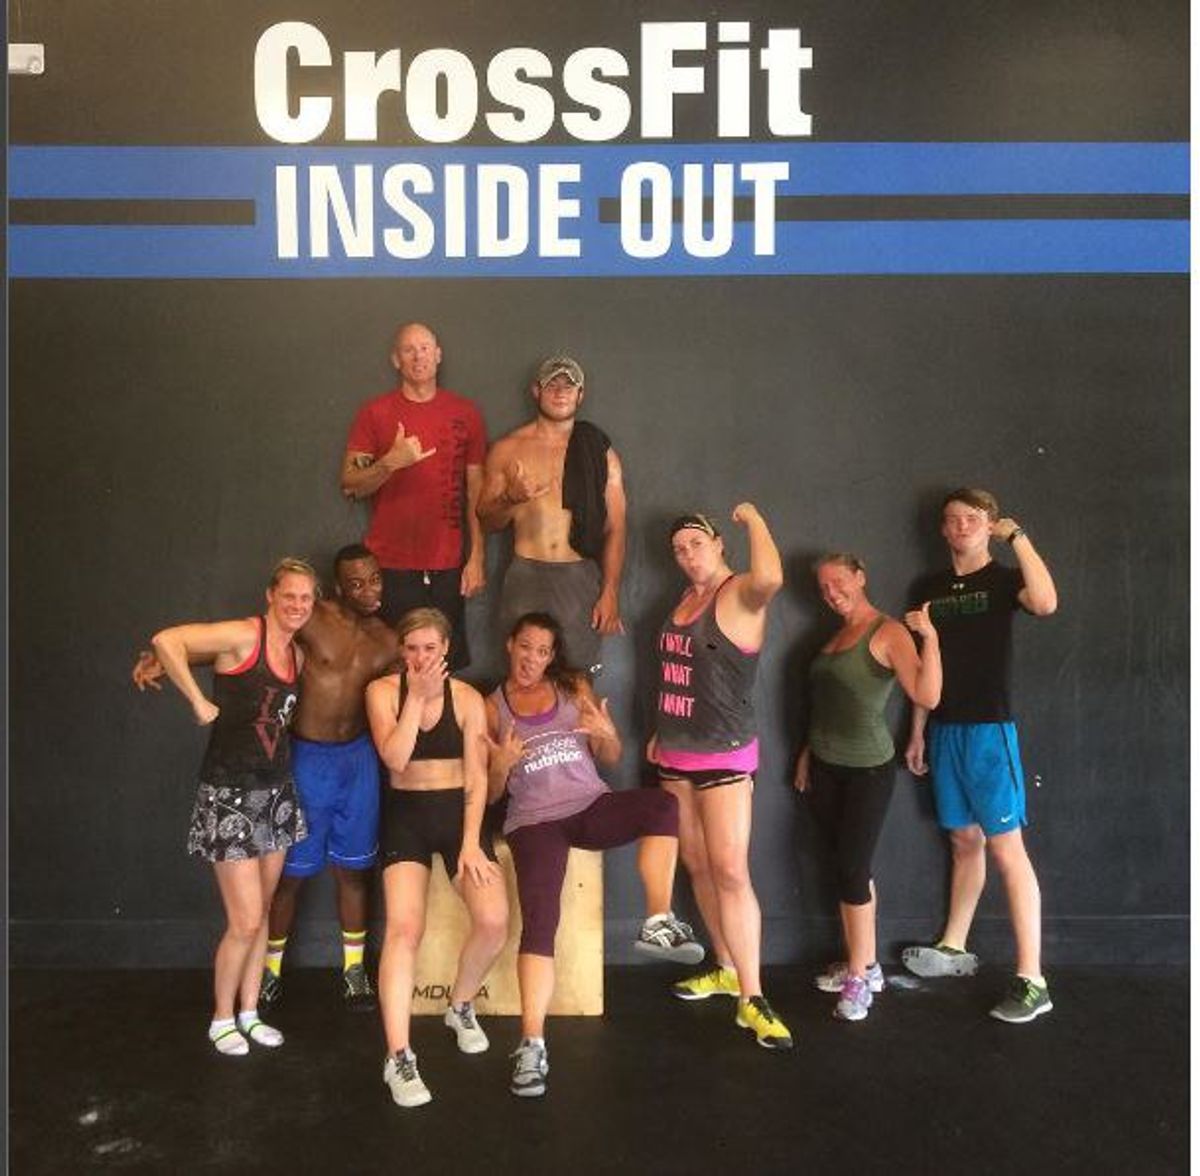 8 Things You Only Understand If You Do CrossFit